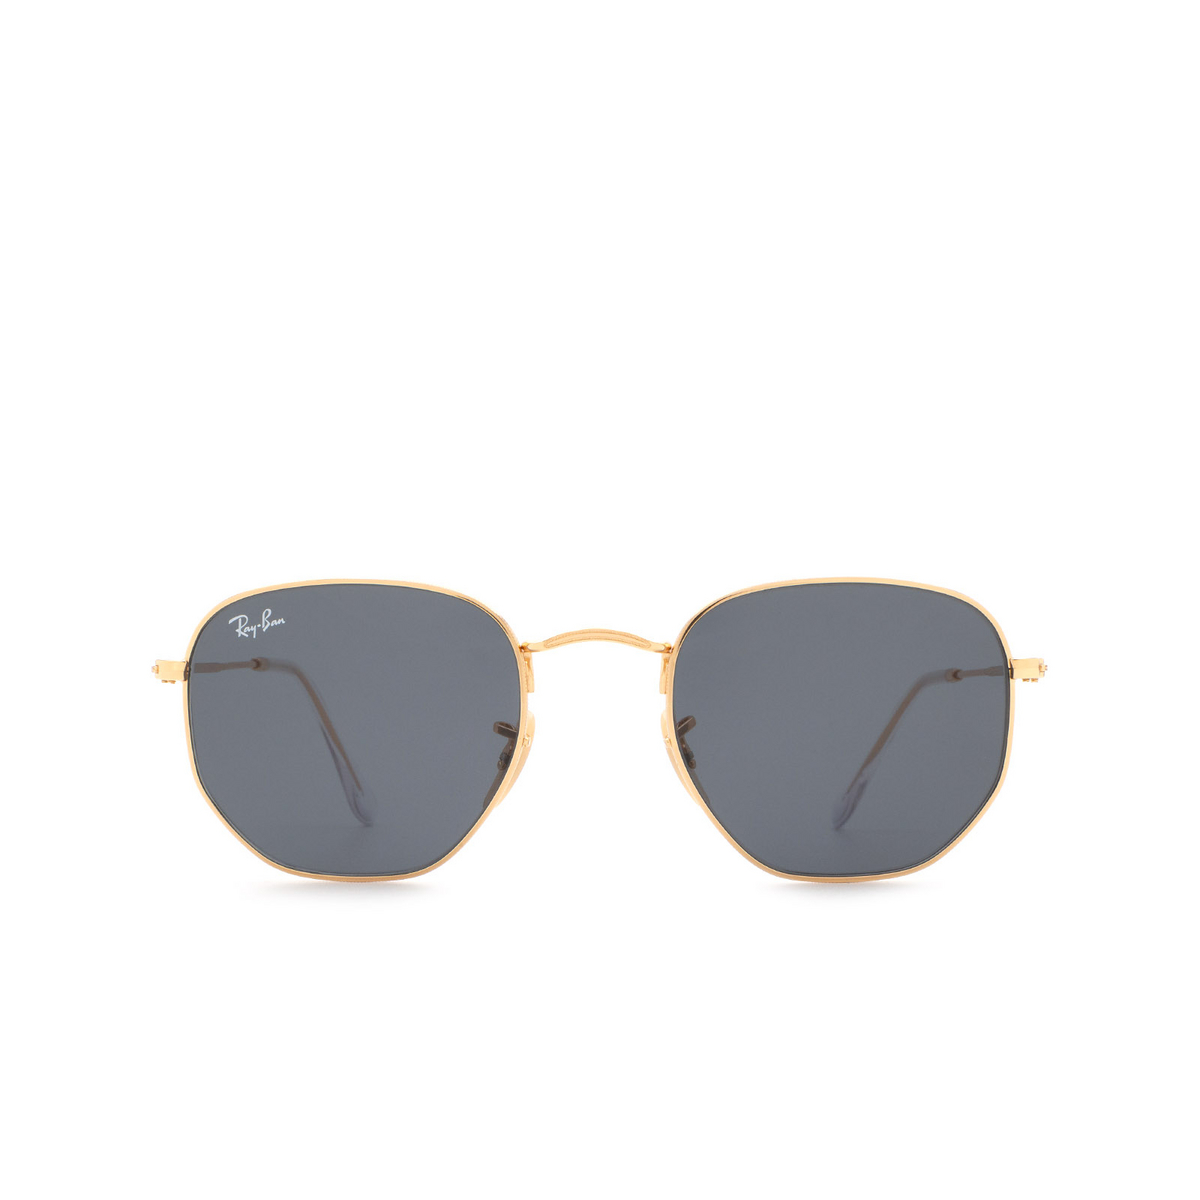 Ray-Ban HEXAGONAL Sunglasses 001/R5 Gold - front view